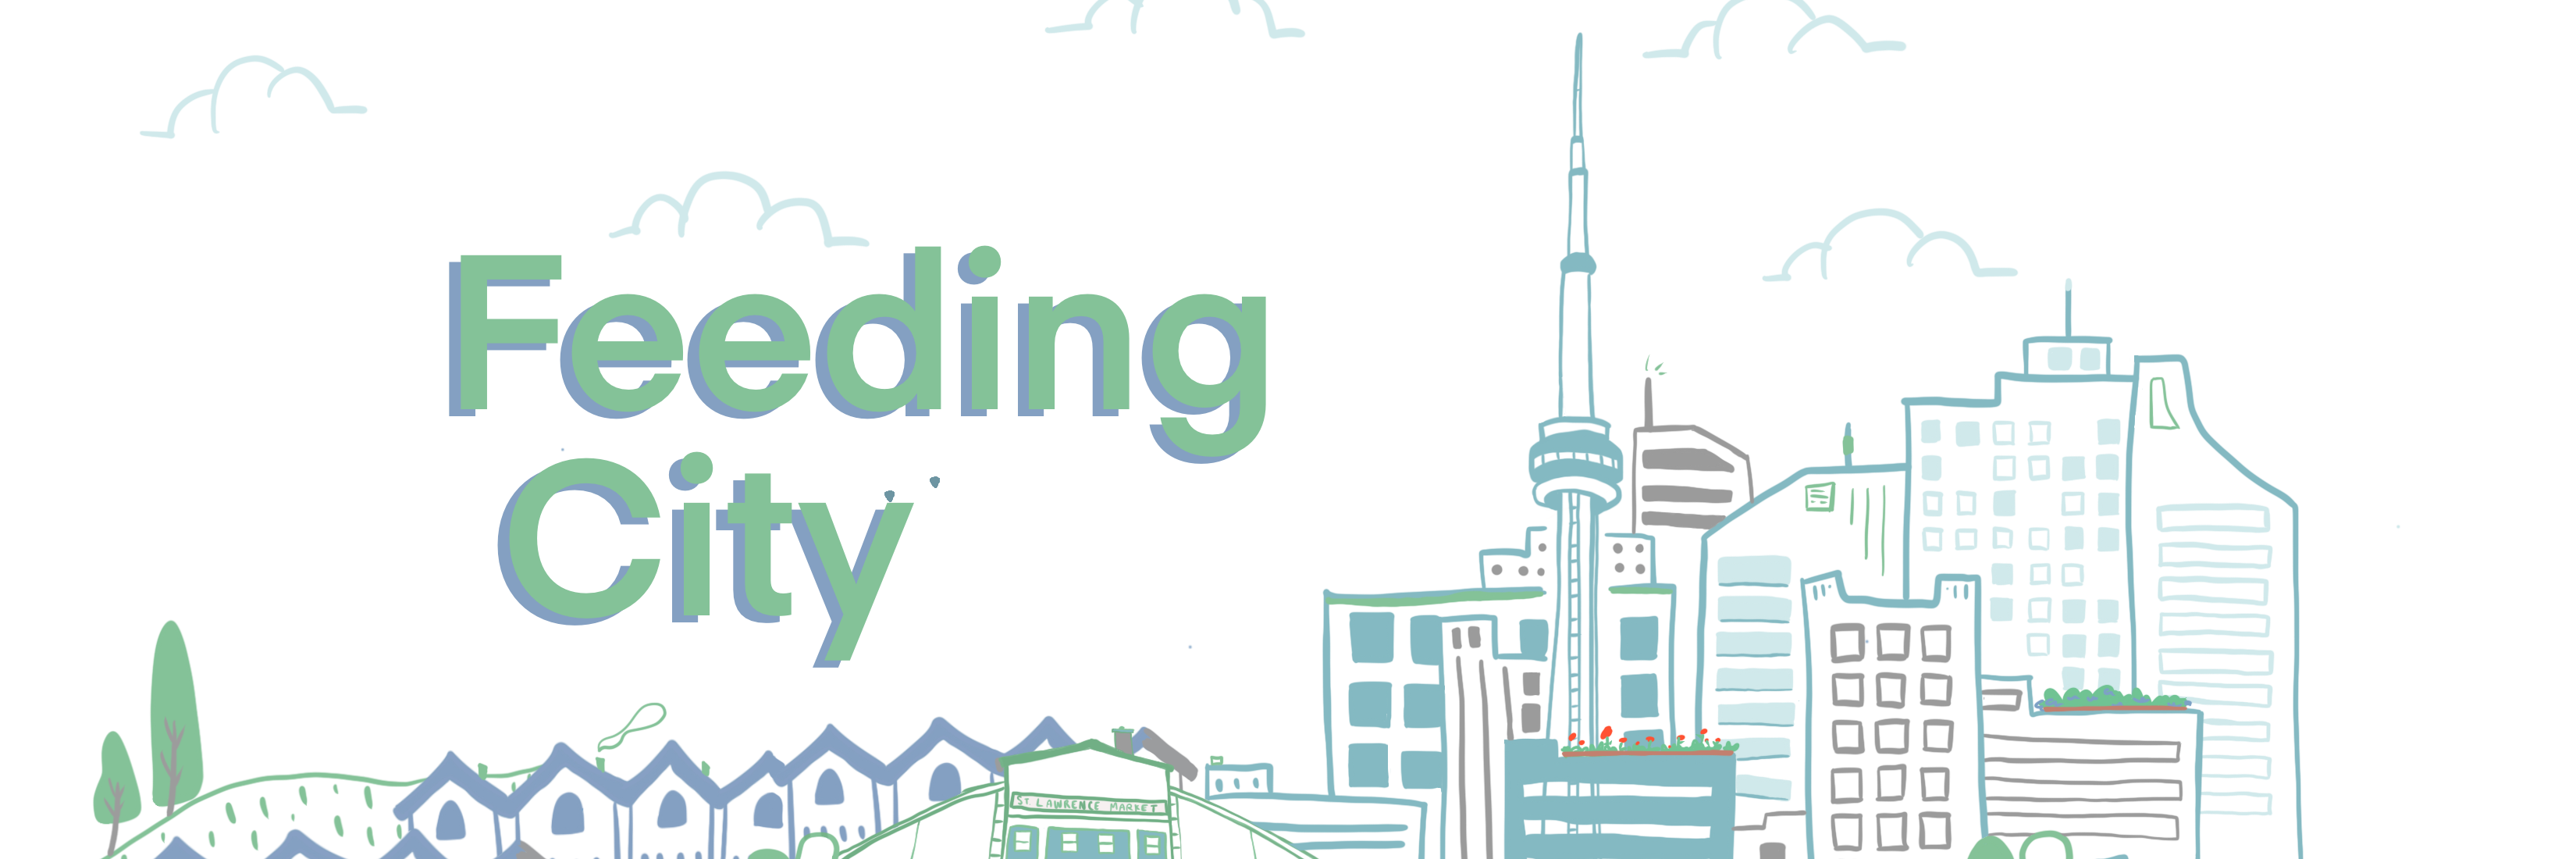 Line drawing of Toronto Skyline with "Feeding City" to left of CN Tower. Gardens in foreground, clouds in background.